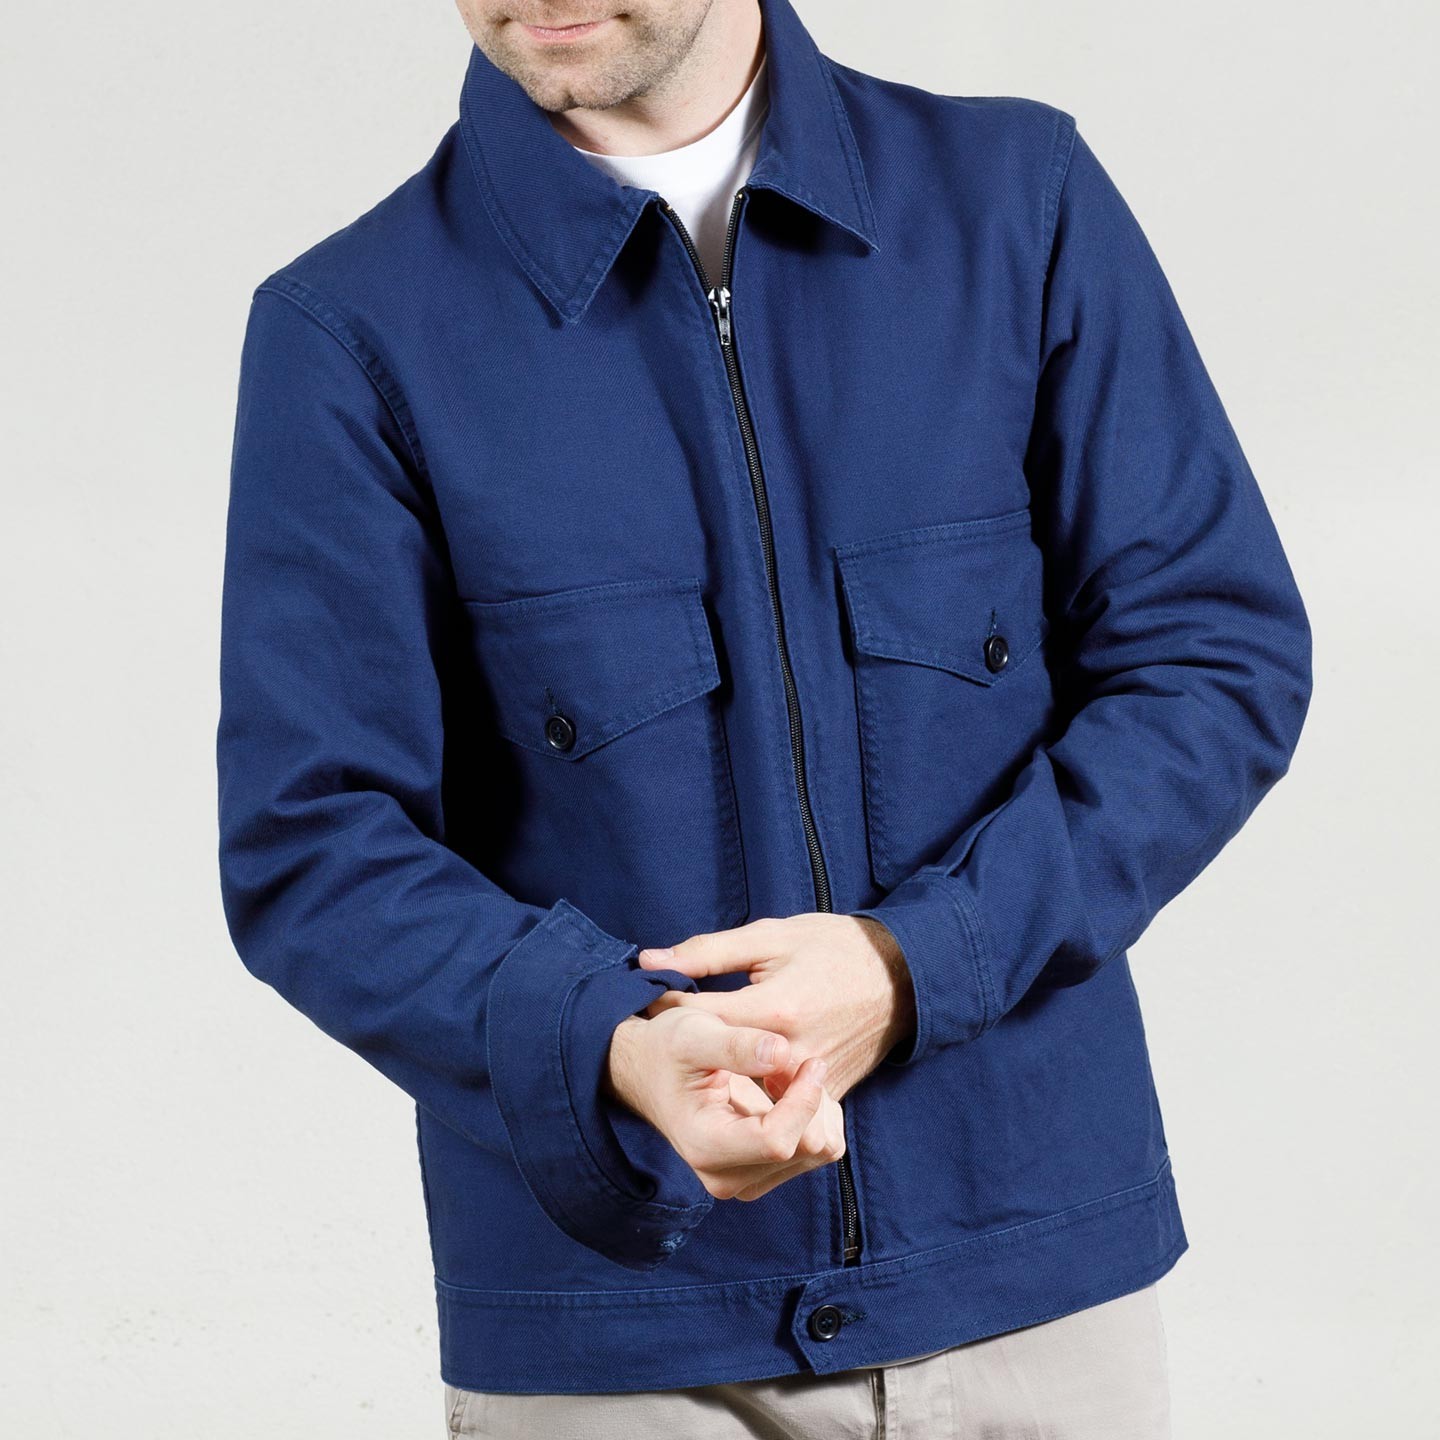 Mechanics Jacket in Organic Cotton VETRA french workwear made in France